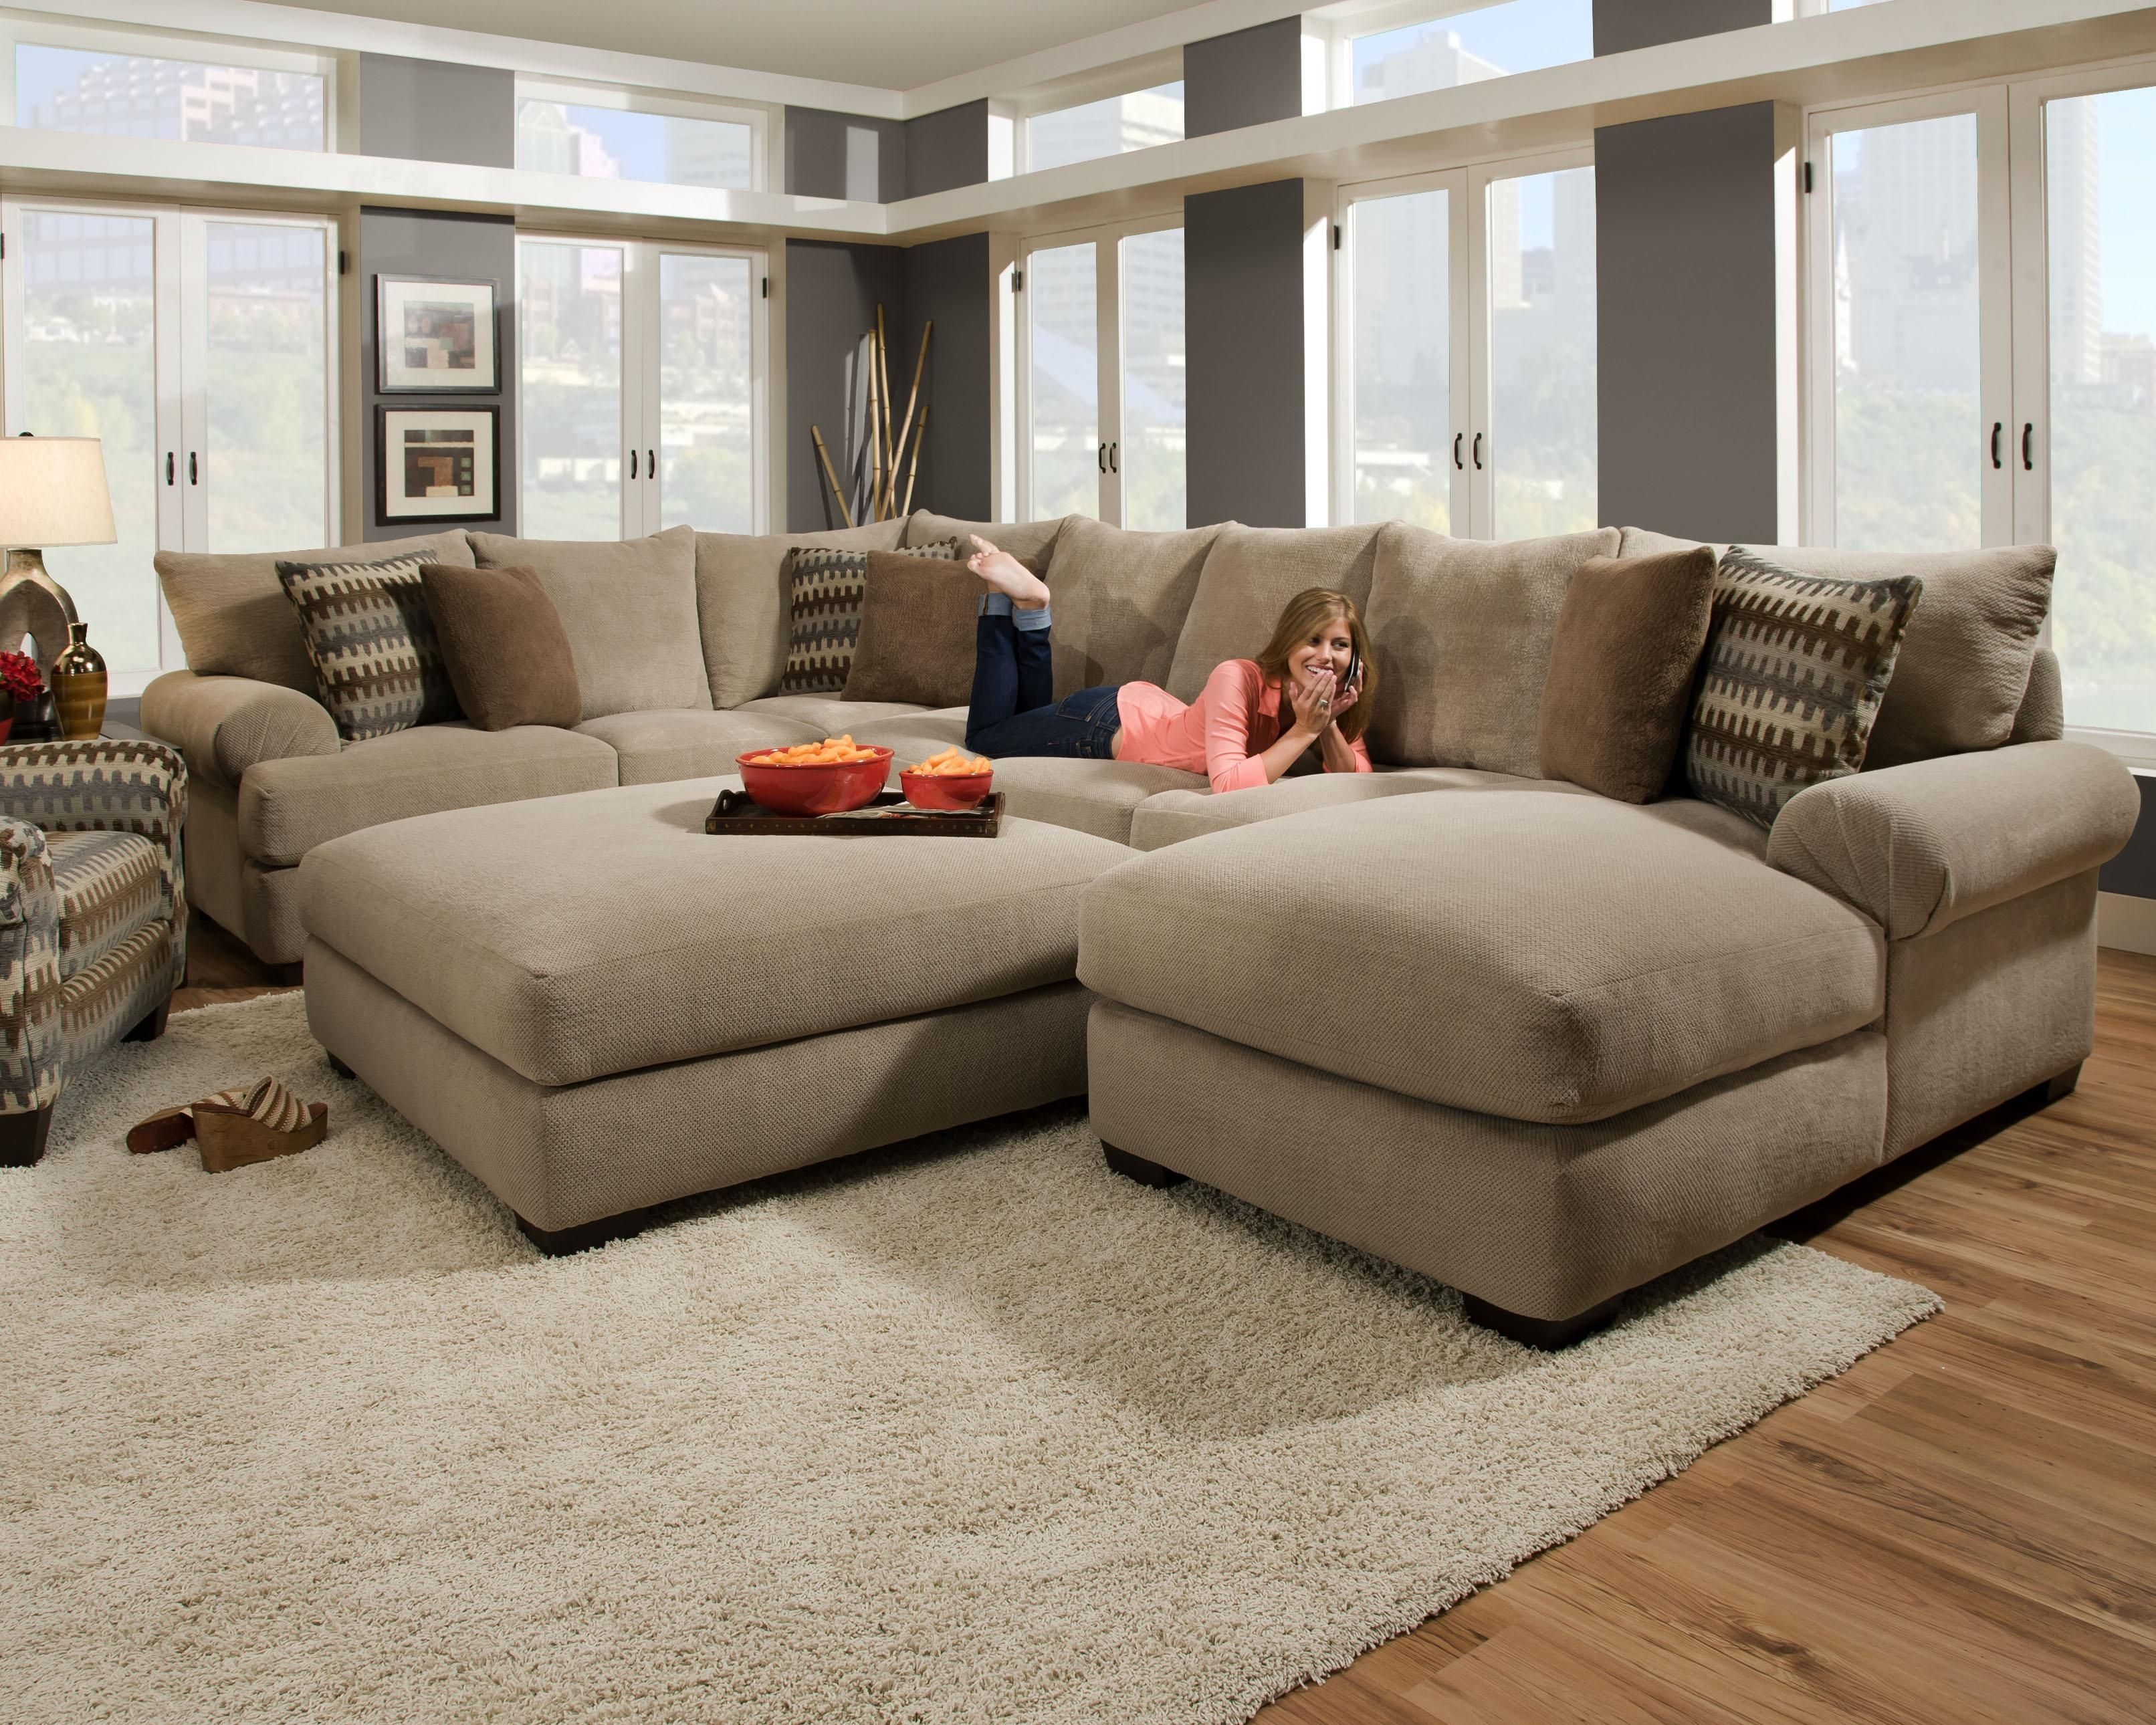 Corinthian 61a0 Sectional Sofa With Right Side Chaise | Furniture Throughout Greenville Nc Sectional Sofas (View 4 of 10)